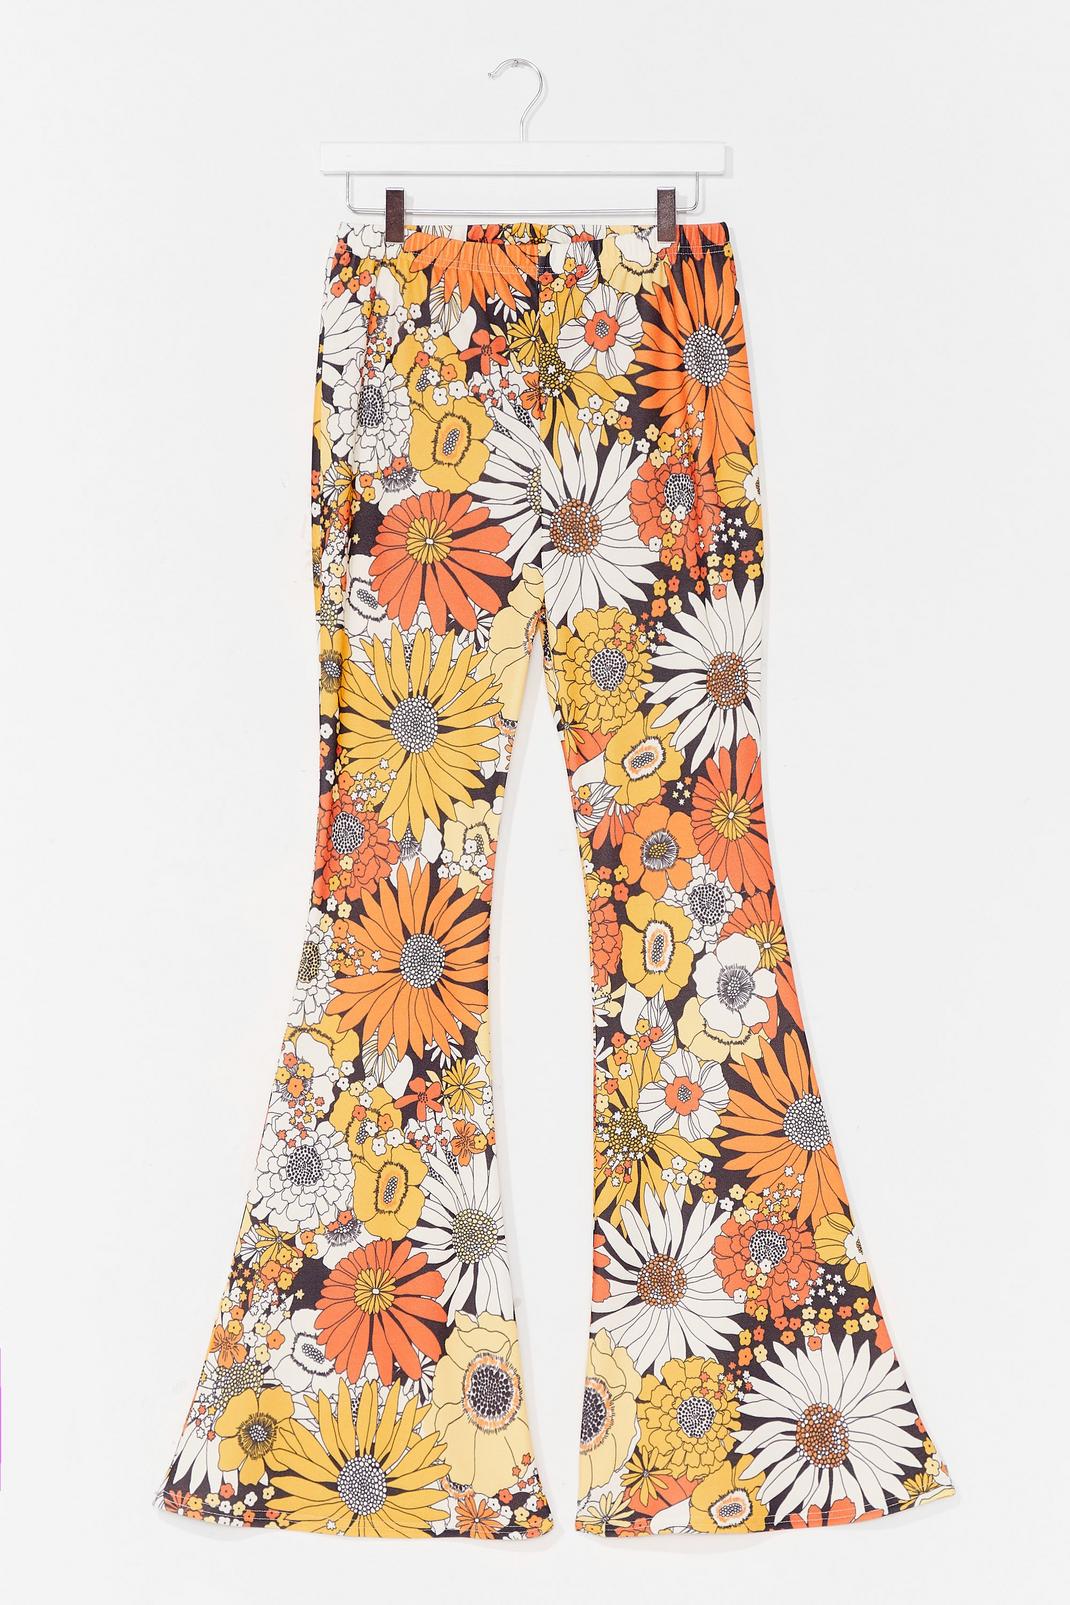 Women's High-Rise Light Wash Floral Print Flare Jeans